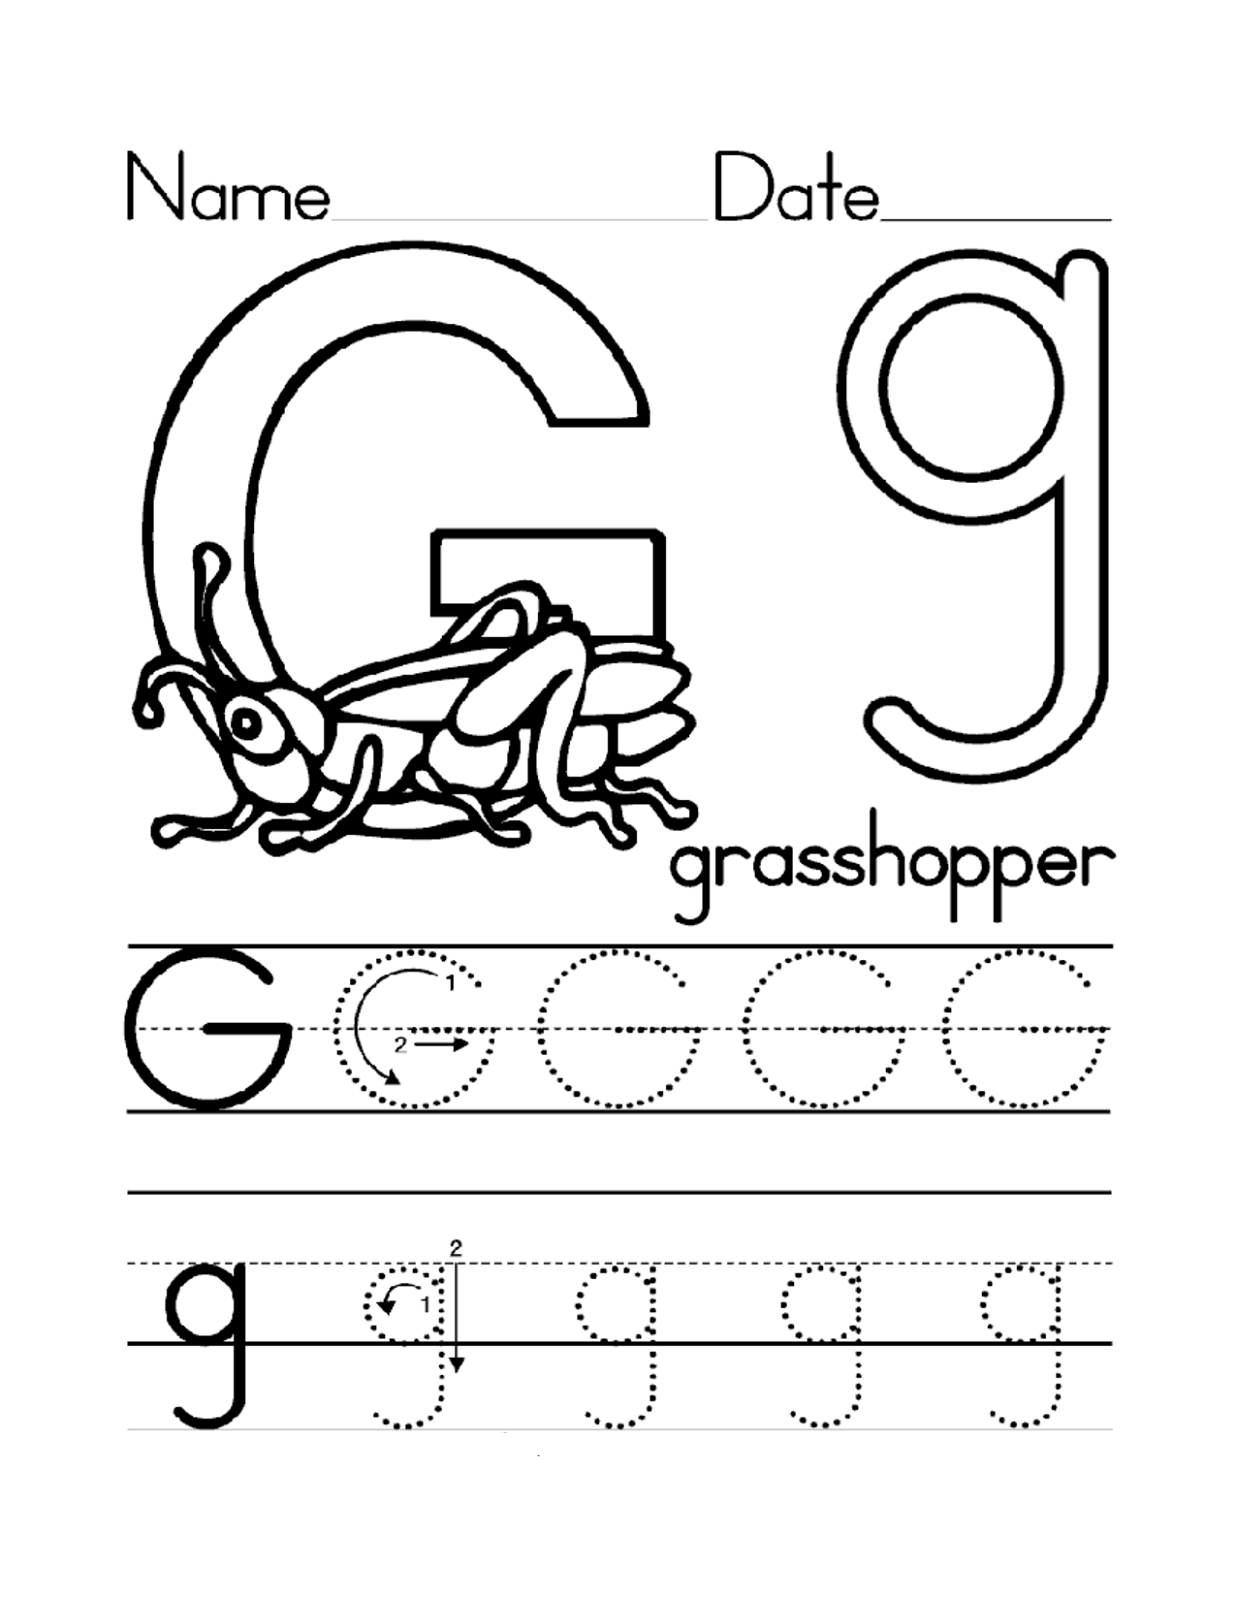 15-exciting-letter-g-worksheets-for-kids-kitty-baby-love